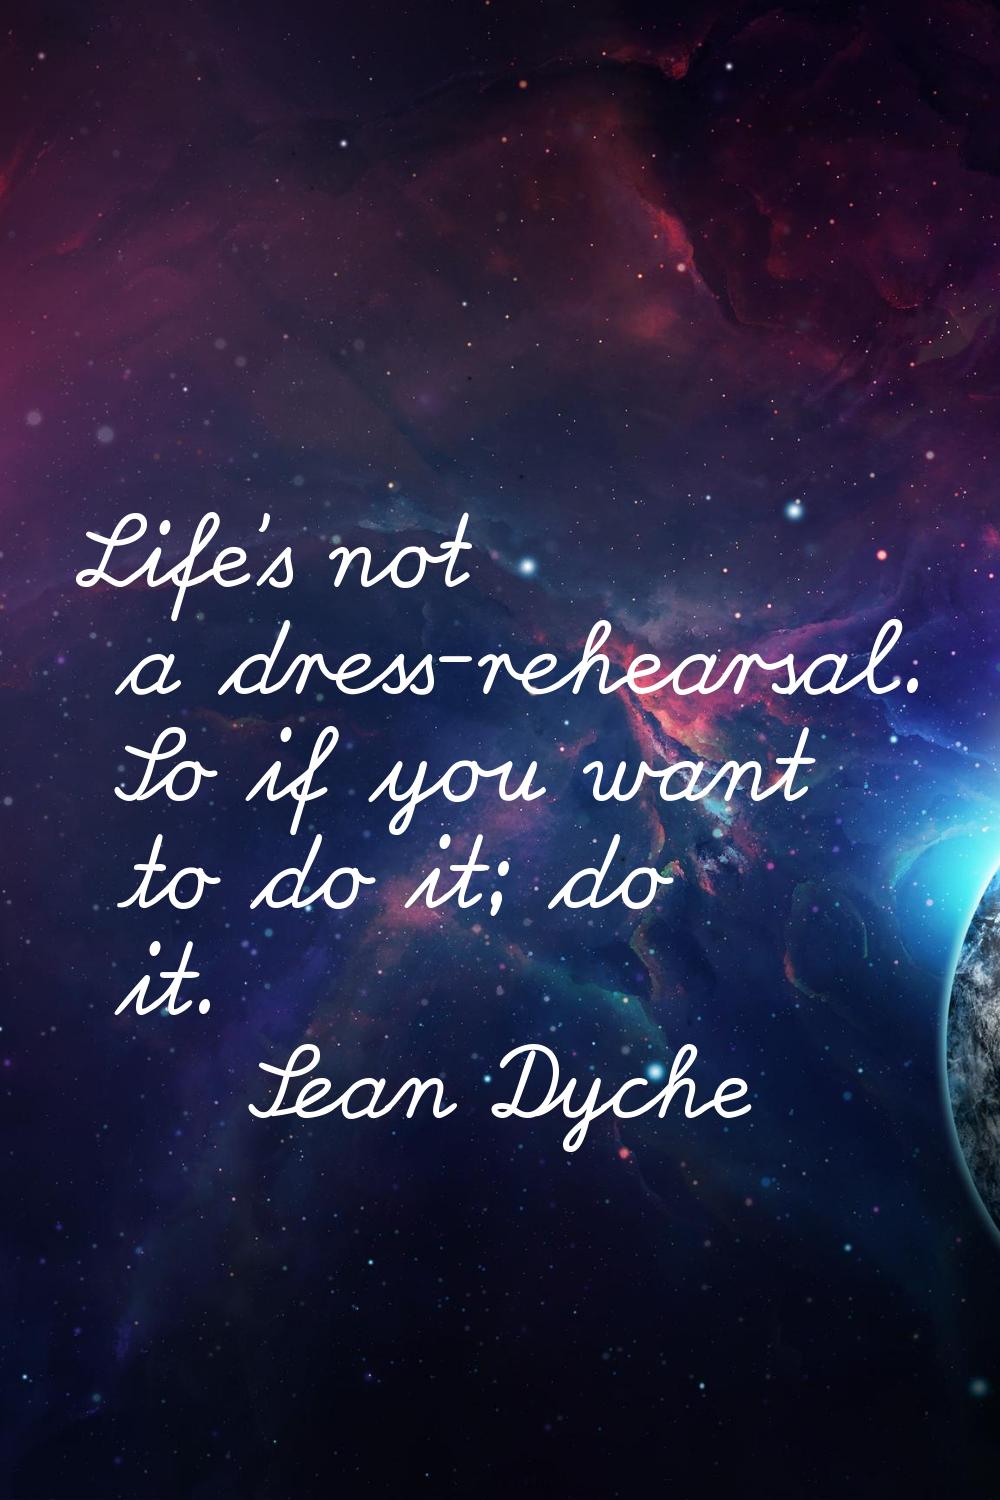 Life's not a dress-rehearsal. So if you want to do it; do it.